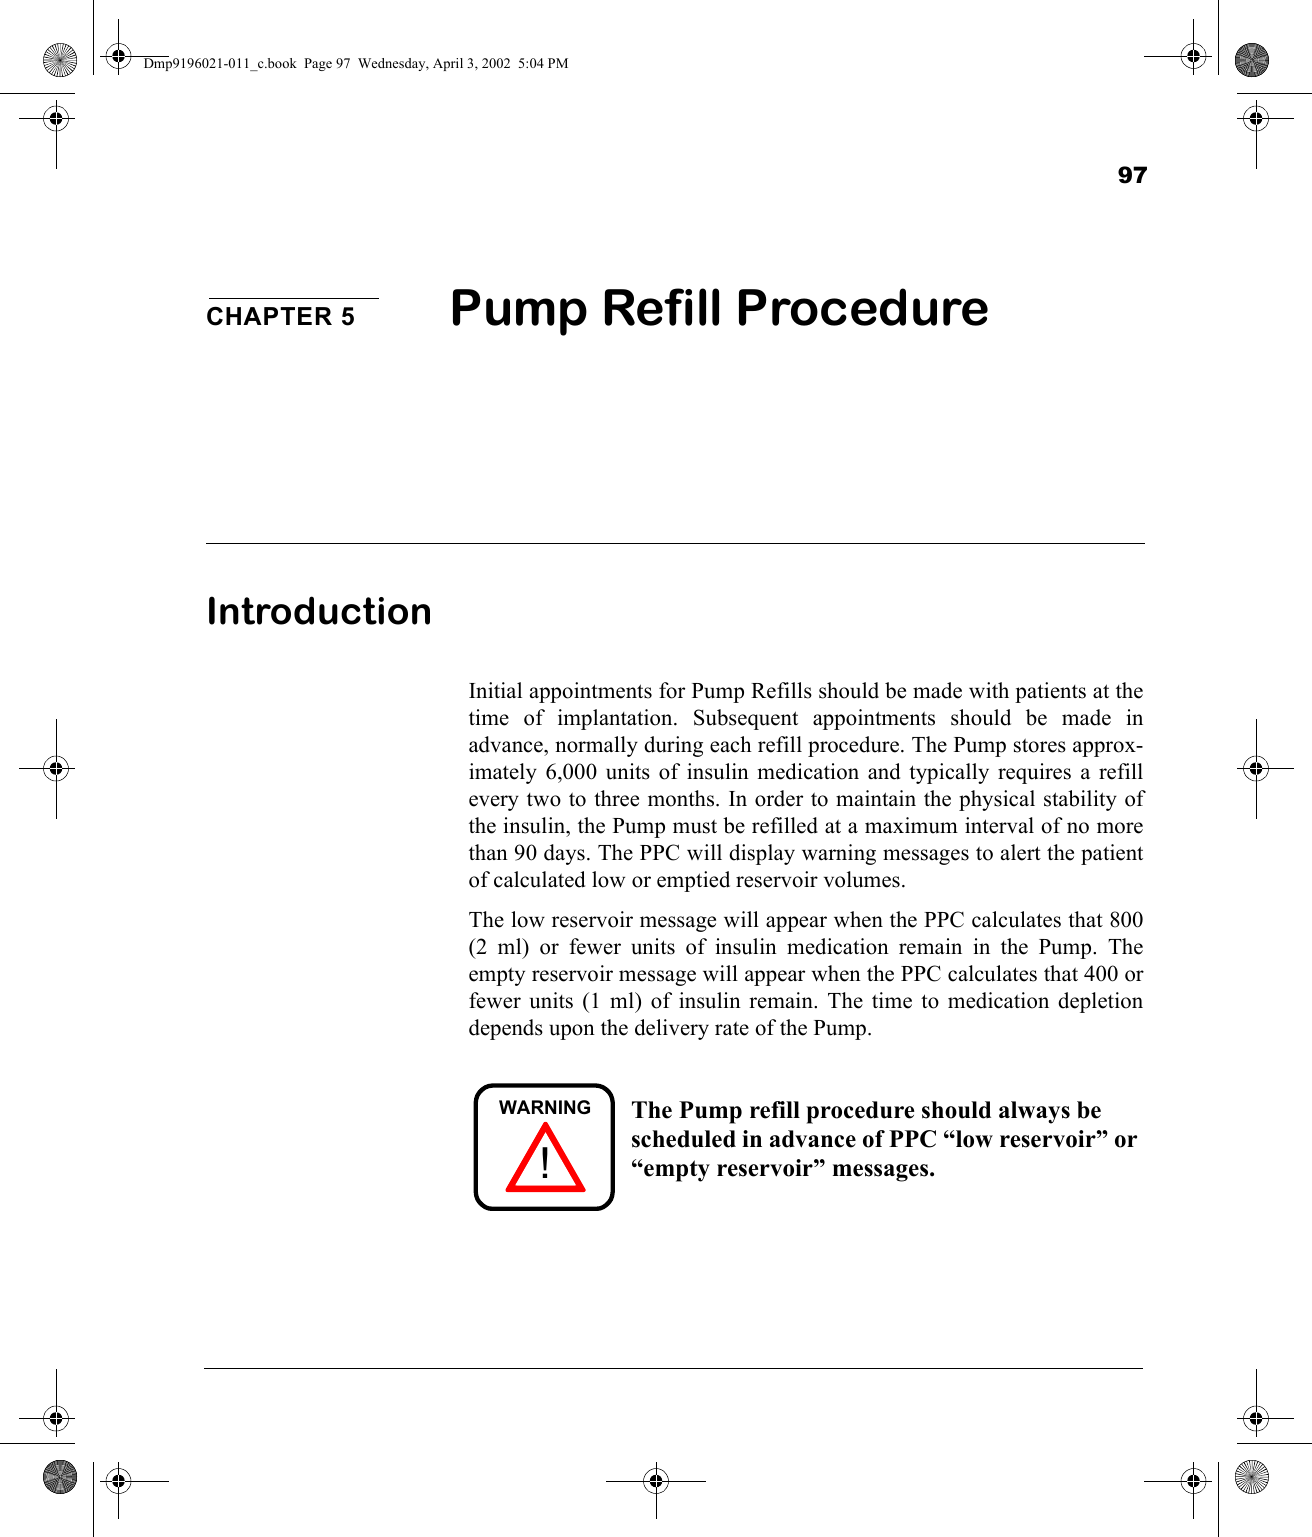 97CHAPTER 5 Pump Refill ProcedureIntroductionInitial appointments for Pump Refills should be made with patients at thetime of implantation. Subsequent appointments should be made inadvance, normally during each refill procedure. The Pump stores approx-imately 6,000 units of insulin medication and typically requires a refillevery two to three months. In order to maintain the physical stability ofthe insulin, the Pump must be refilled at a maximum interval of no morethan 90 days. The PPC will display warning messages to alert the patientof calculated low or emptied reservoir volumes.The low reservoir message will appear when the PPC calculates that 800(2 ml) or fewer units of insulin medication remain in the Pump. Theempty reservoir message will appear when the PPC calculates that 400 orfewer units (1 ml) of insulin remain. The time to medication depletiondepends upon the delivery rate of the Pump.The Pump refill procedure should always be scheduled in advance of PPC “low reservoir” or “empty reservoir” messages.!WARNINGDmp9196021-011_c.book  Page 97  Wednesday, April 3, 2002  5:04 PM